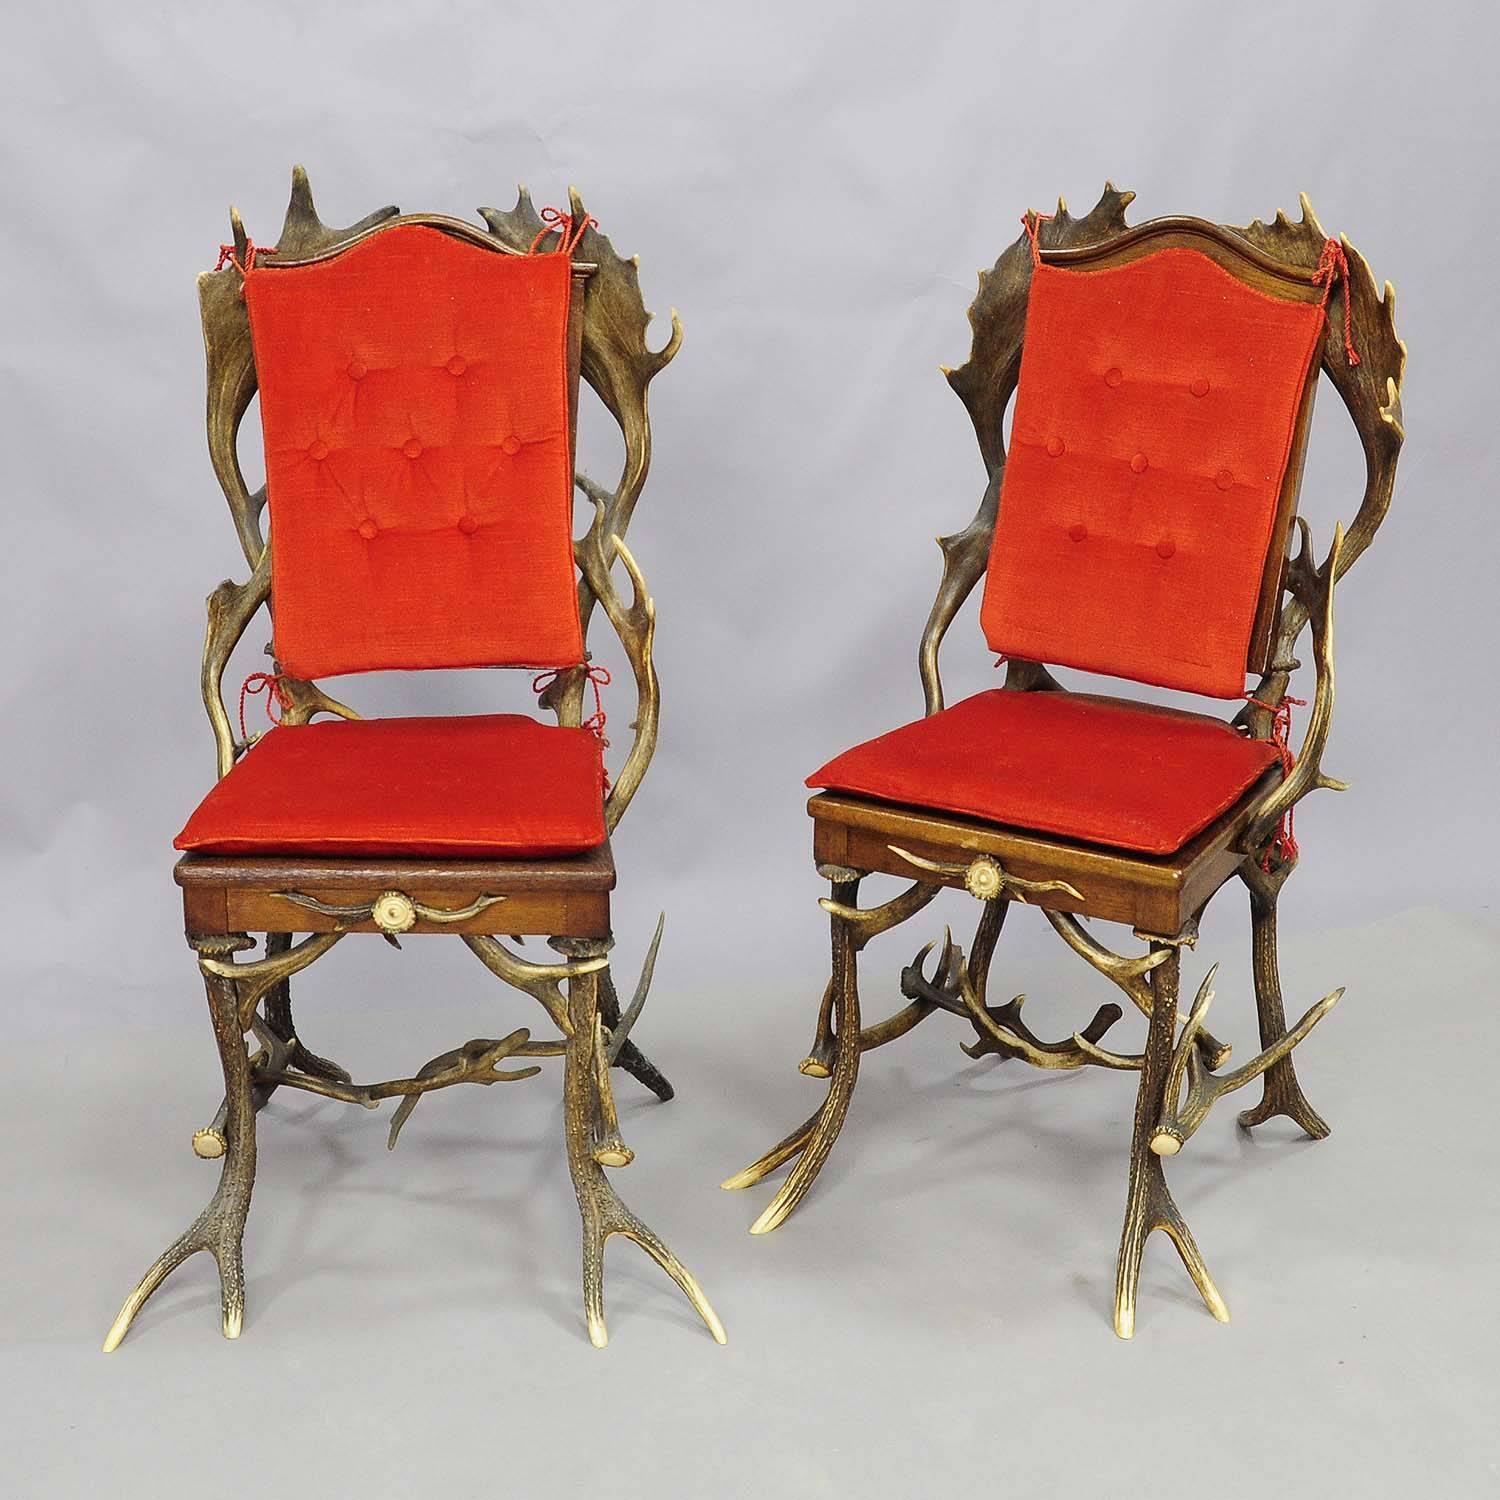 A pair antique Black Forest antler chairs with real stag antlers as legs and backrest with fallow deer antlers, seat and backrest with wicker mesh. Black Forest, circa 1900. Come with cushions with red canvas which were added later.